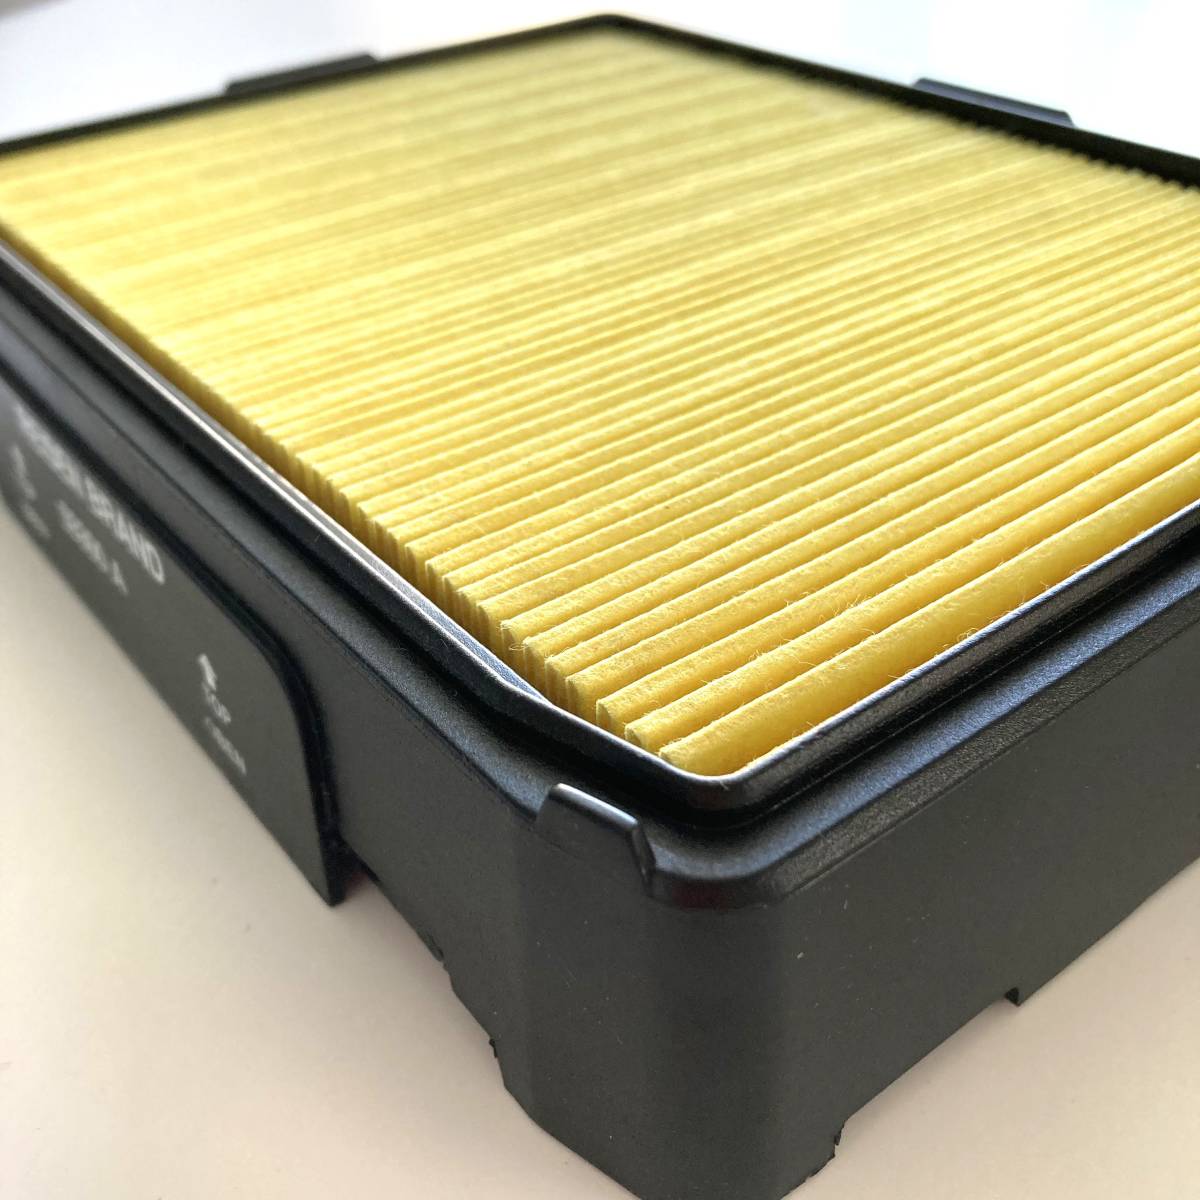 BMW air filter rectangle 1981 year on and after model for R100RS R100GS R100RT R100R Mystic R80 R80GS Basic R80g/s R65 R45 list 